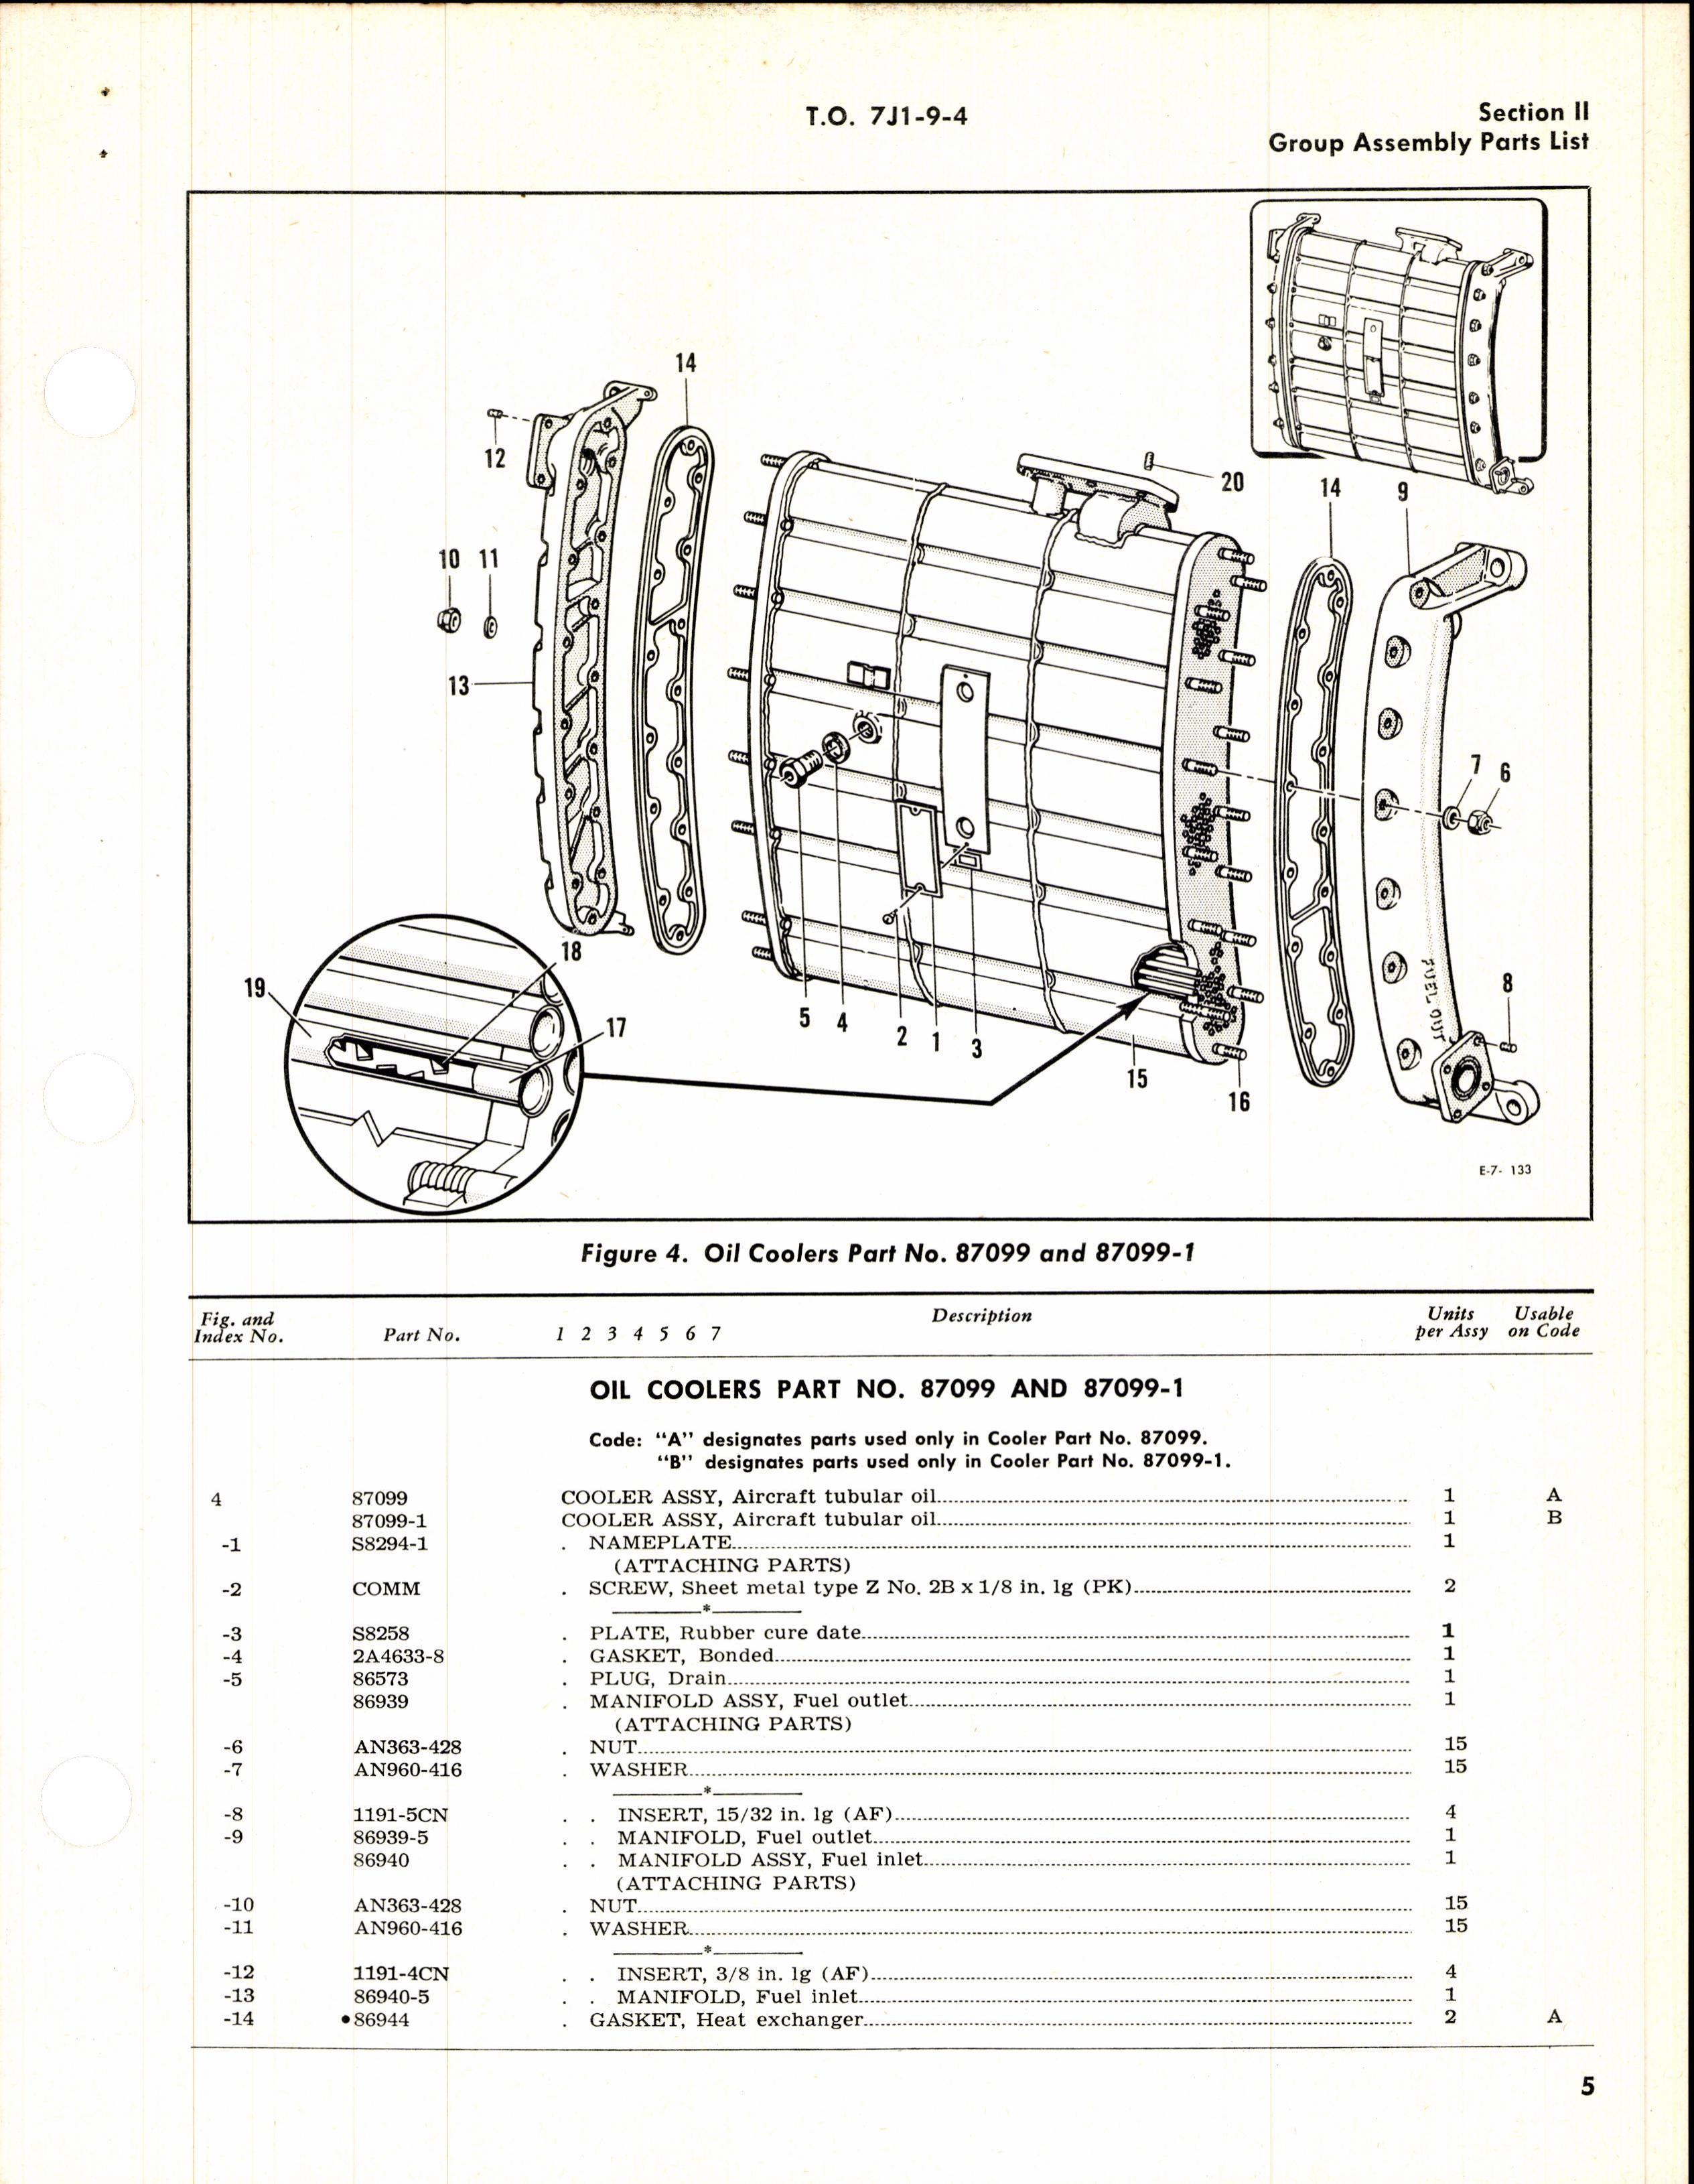 Sample page 7 from AirCorps Library document: Illustrated Parts Breakdown for Oil Coolers